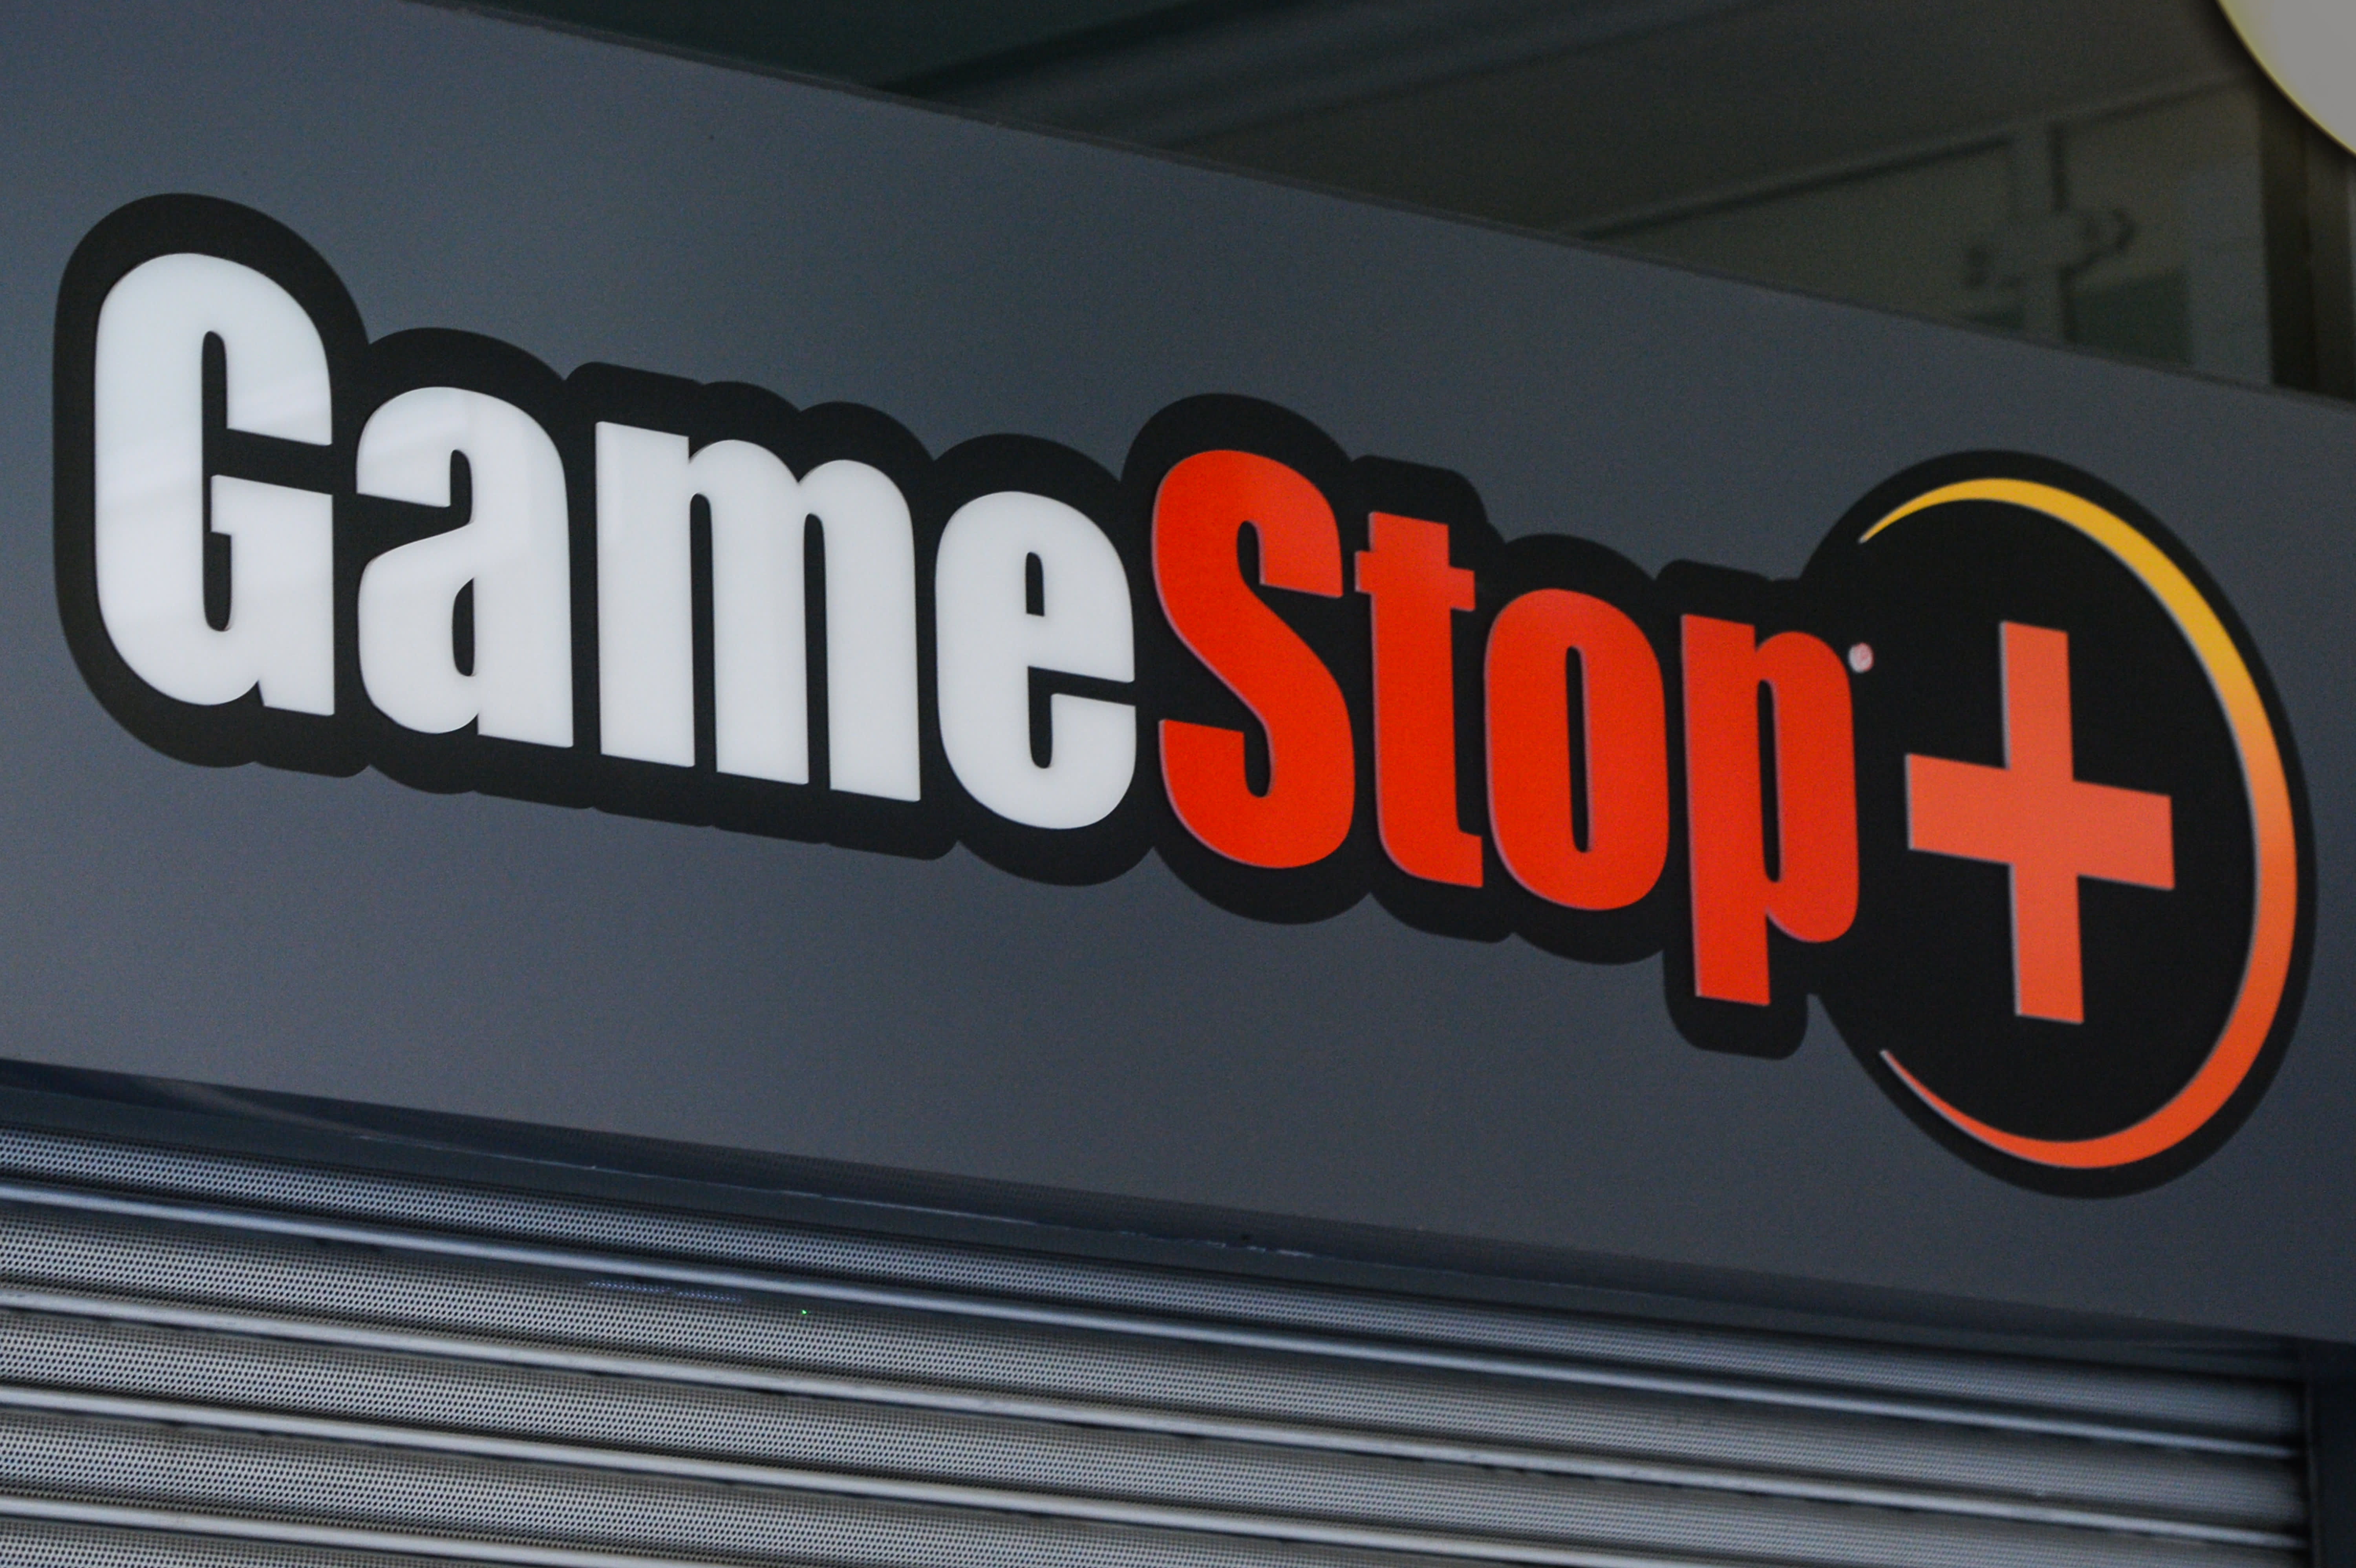 The strategist called GameStop a buying idea before the short squeeze